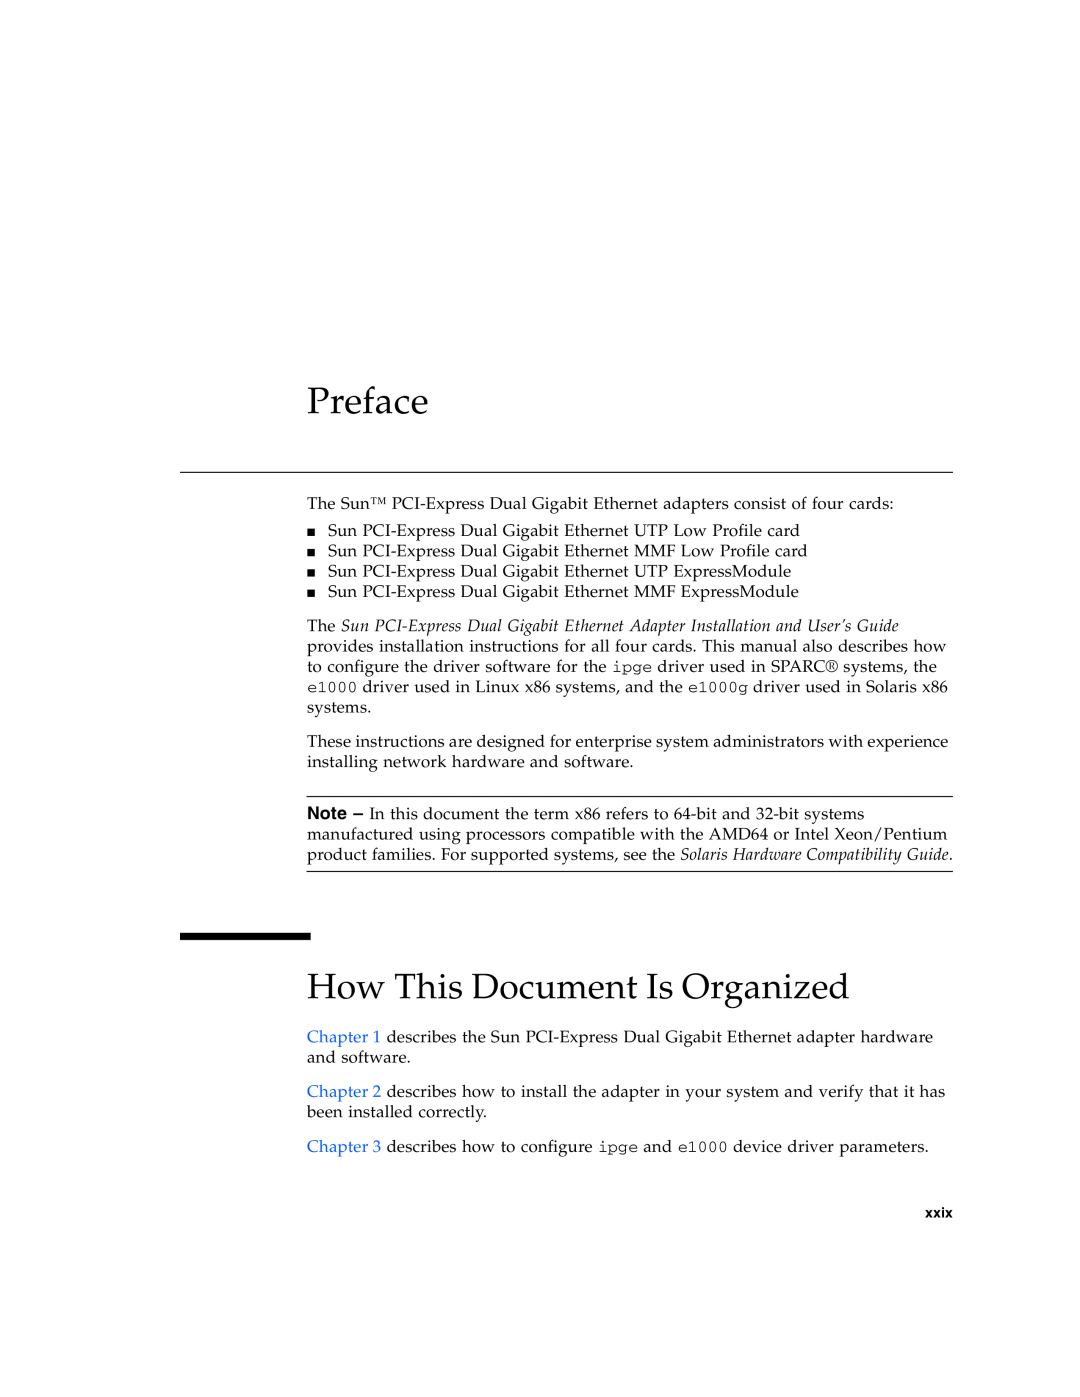 Sun Microsystems Gigabit Ethernet MMF/UTP Adapter manual Preface, How This Document Is Organized 